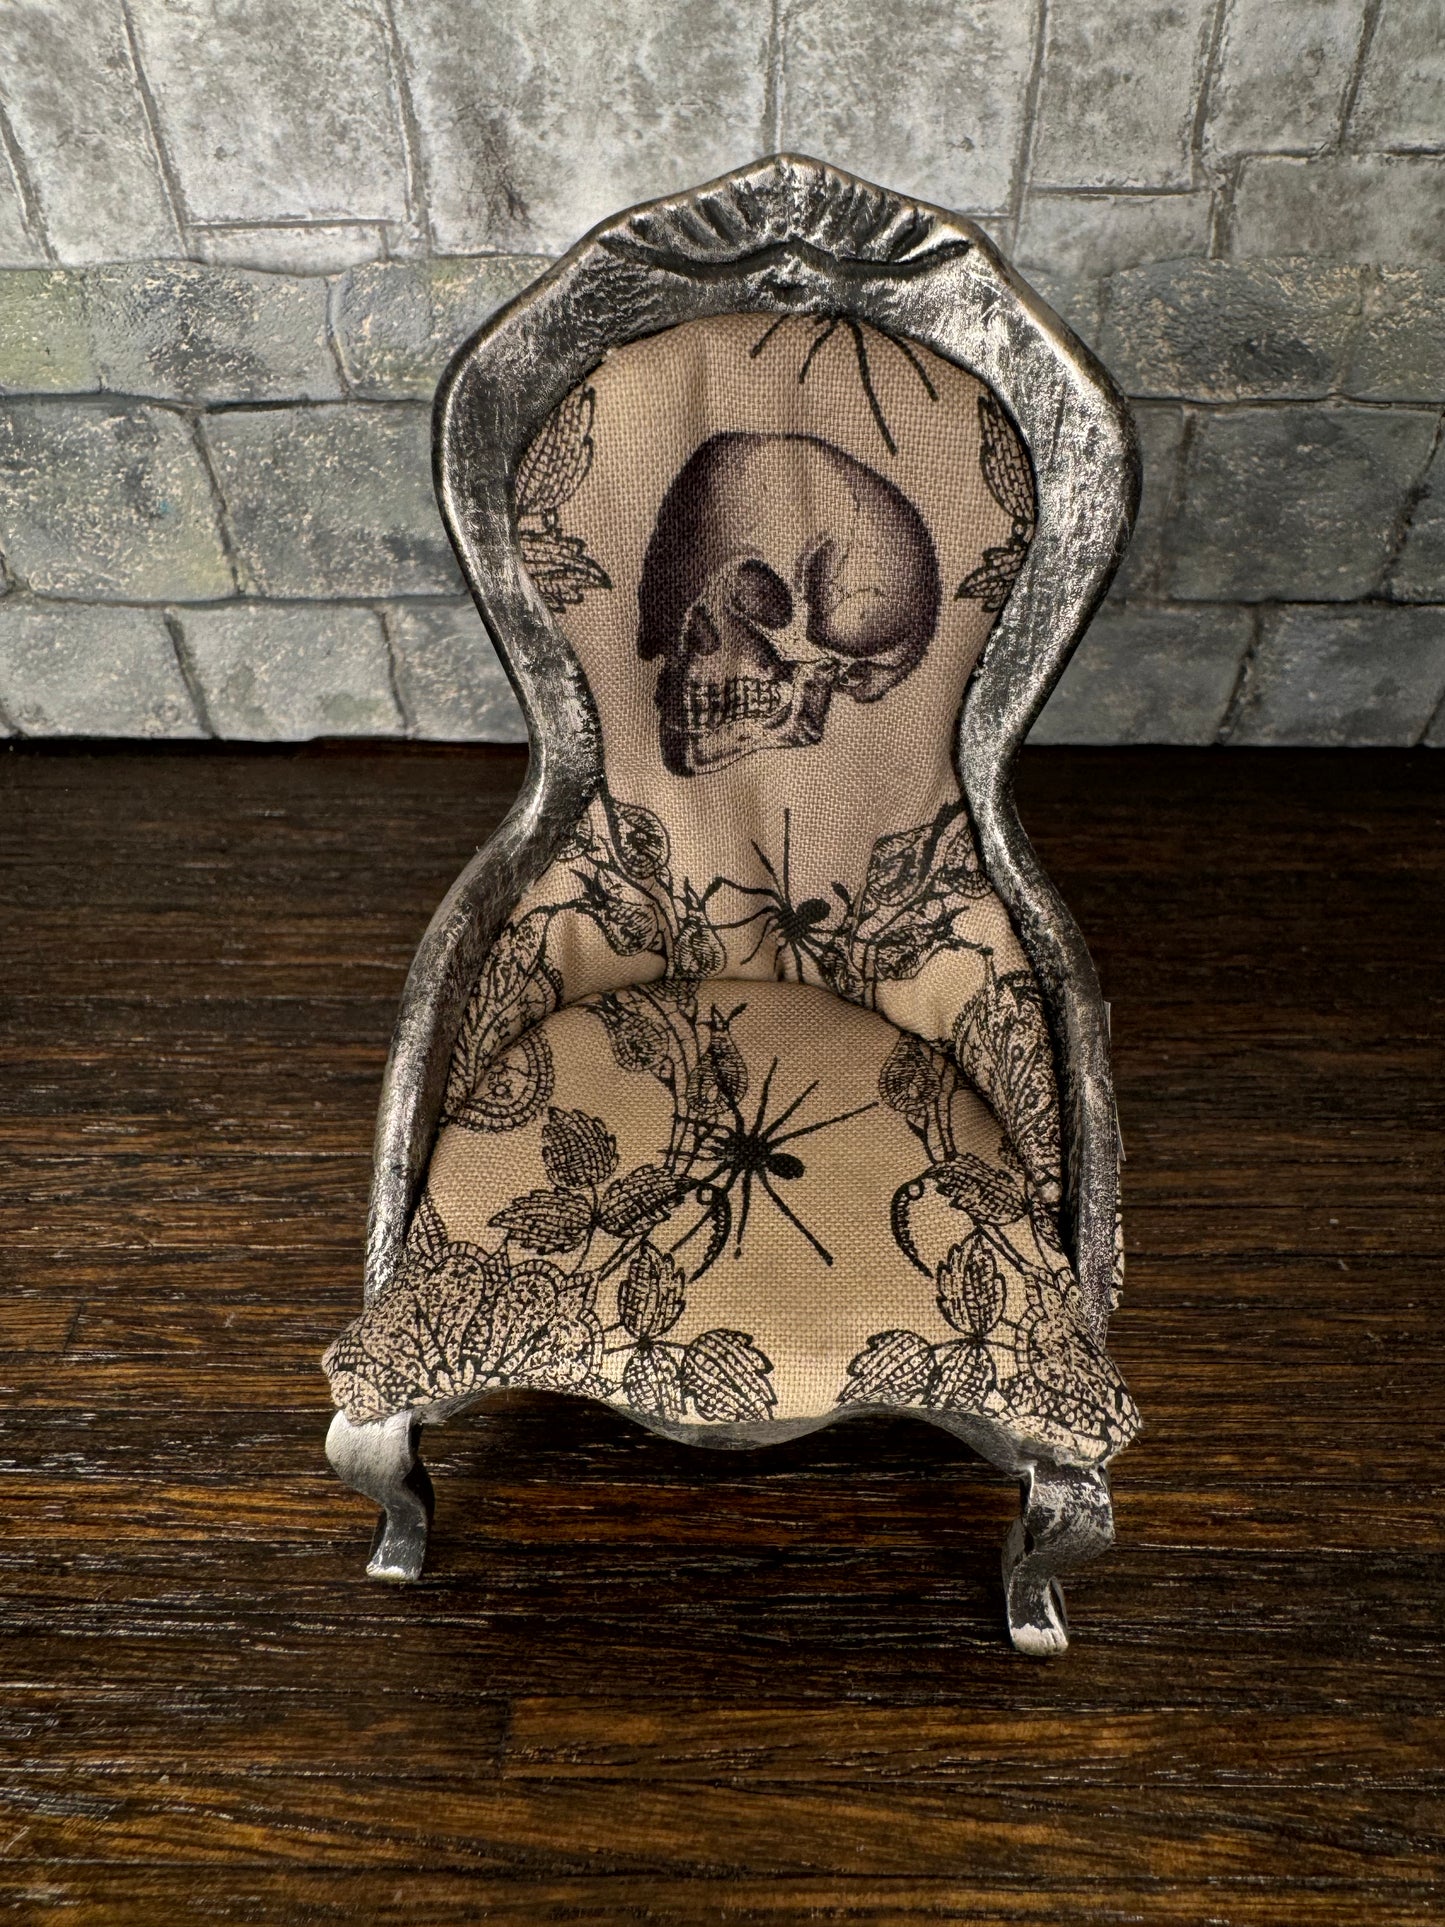 Gothic Spooky Skull and Spider Ladies Chair - Dollhouse Miniature 1:12 Scale